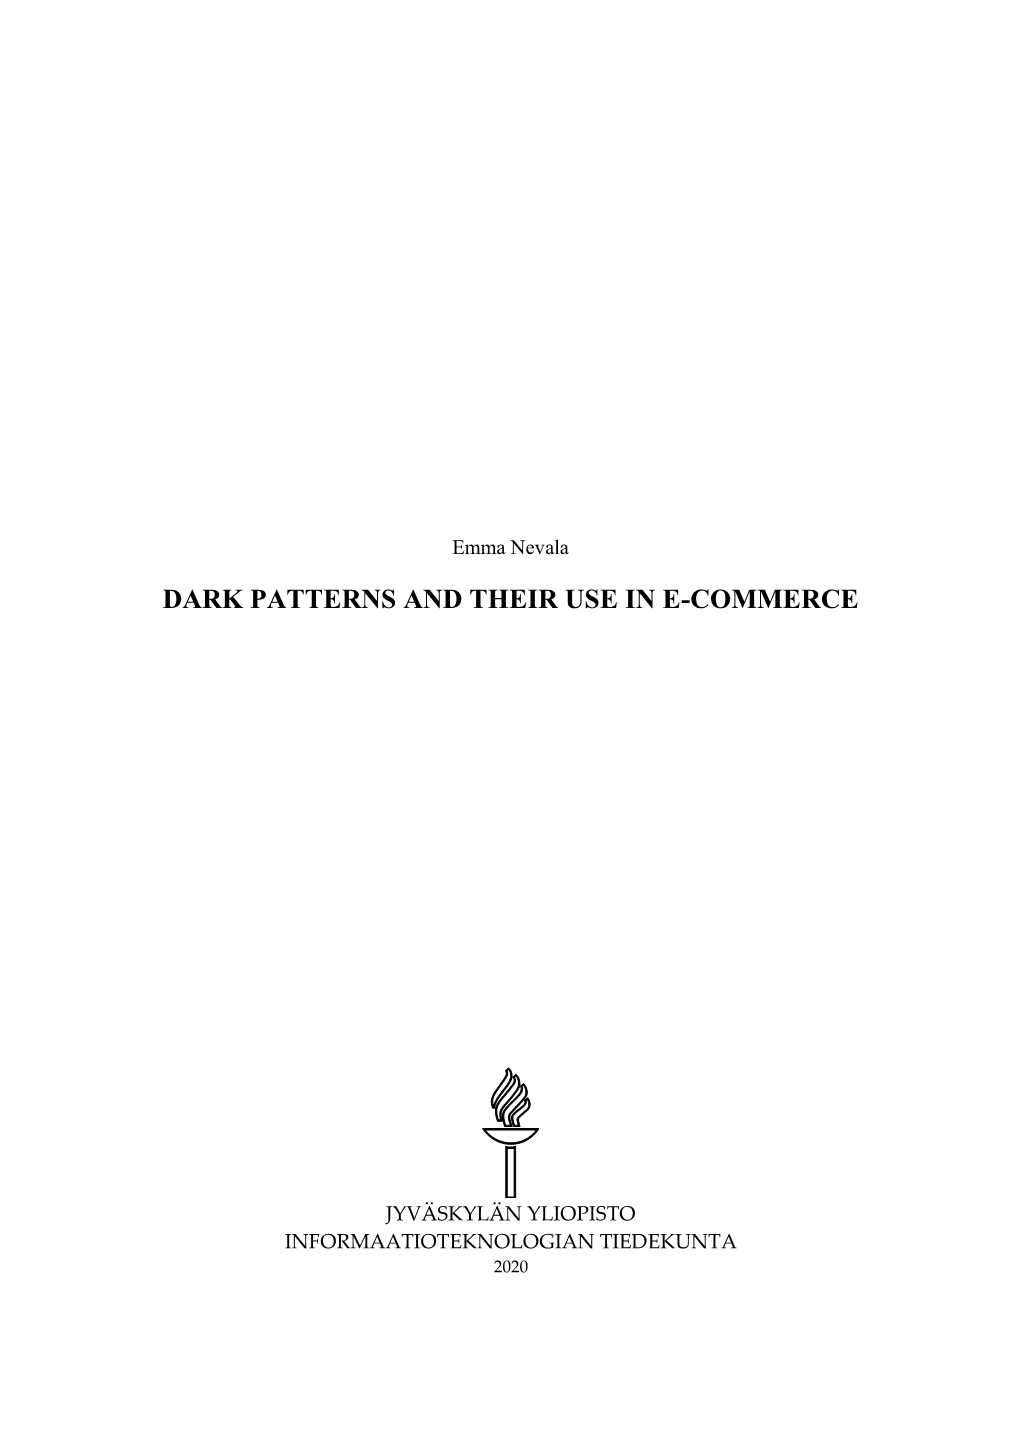 Dark Patterns and Their Use in E-Commerce